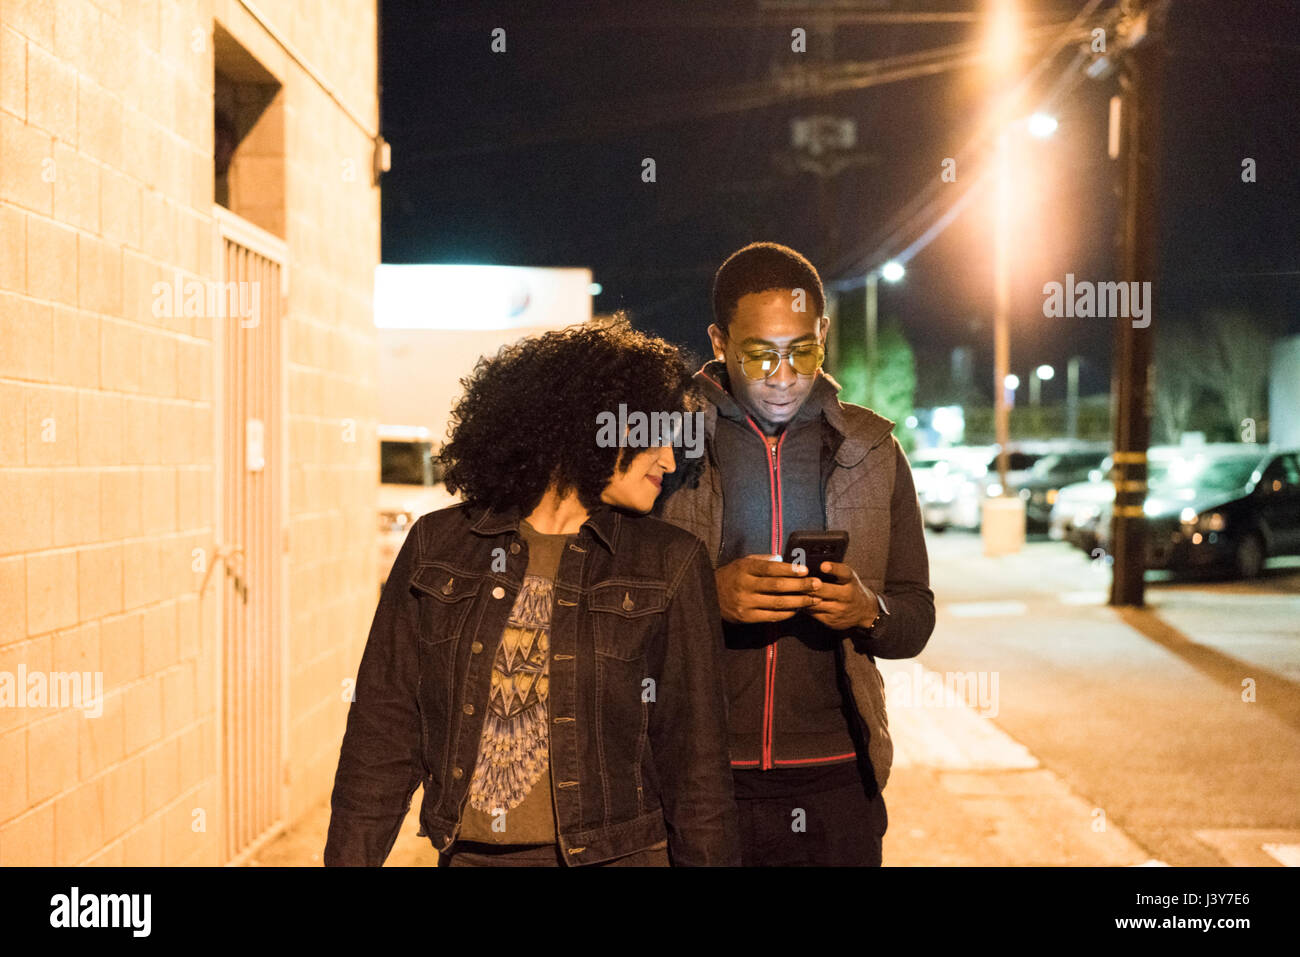 Couple walking in street at night looking at smartphone, Los Angeles, California, USA Stock Photo